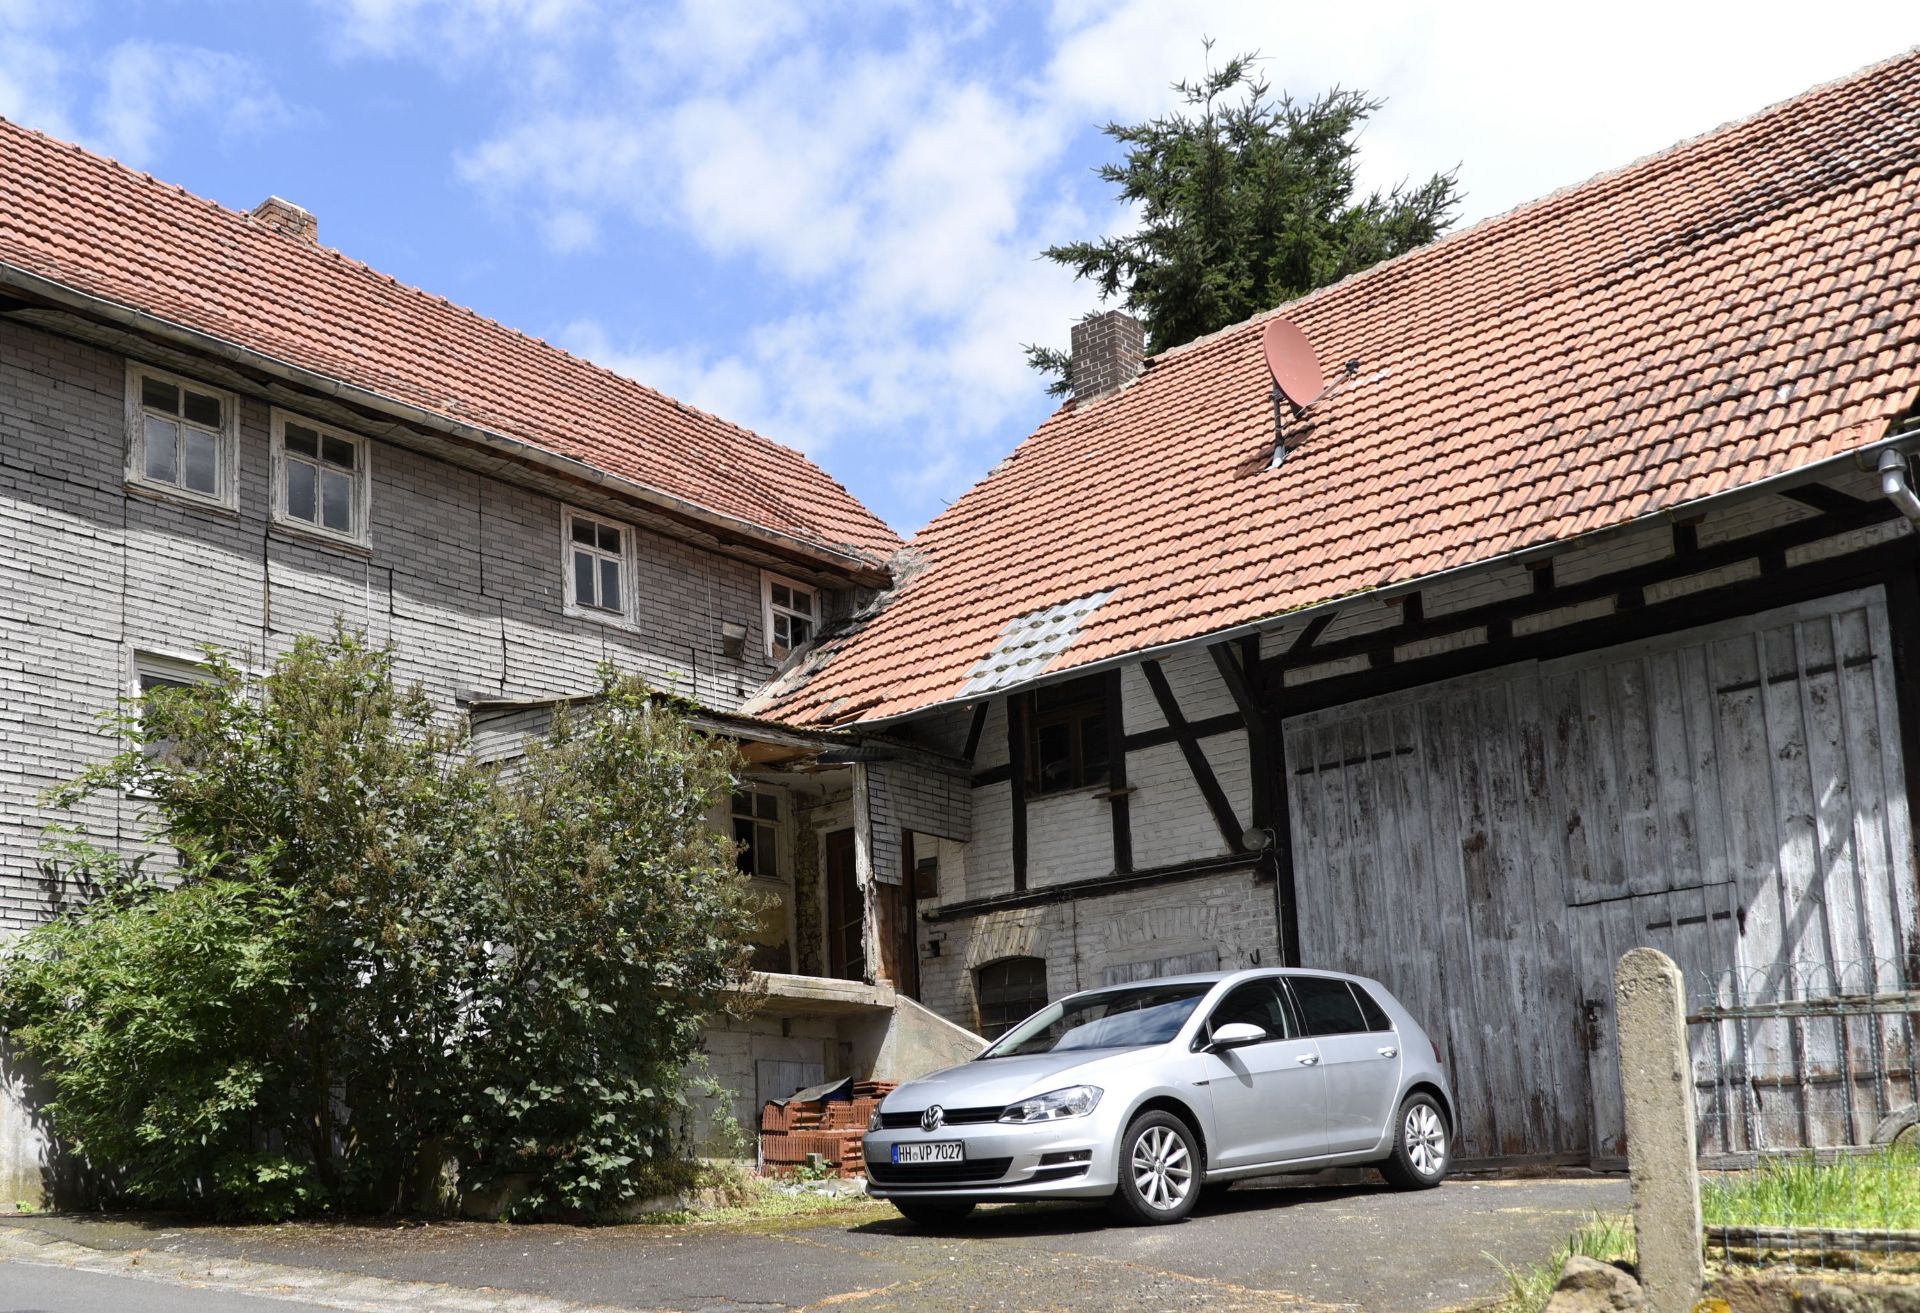 Freehold Property With 691 SQM Of Land In The Village Of Unterstoppel, Germany! - Image 2 of 60